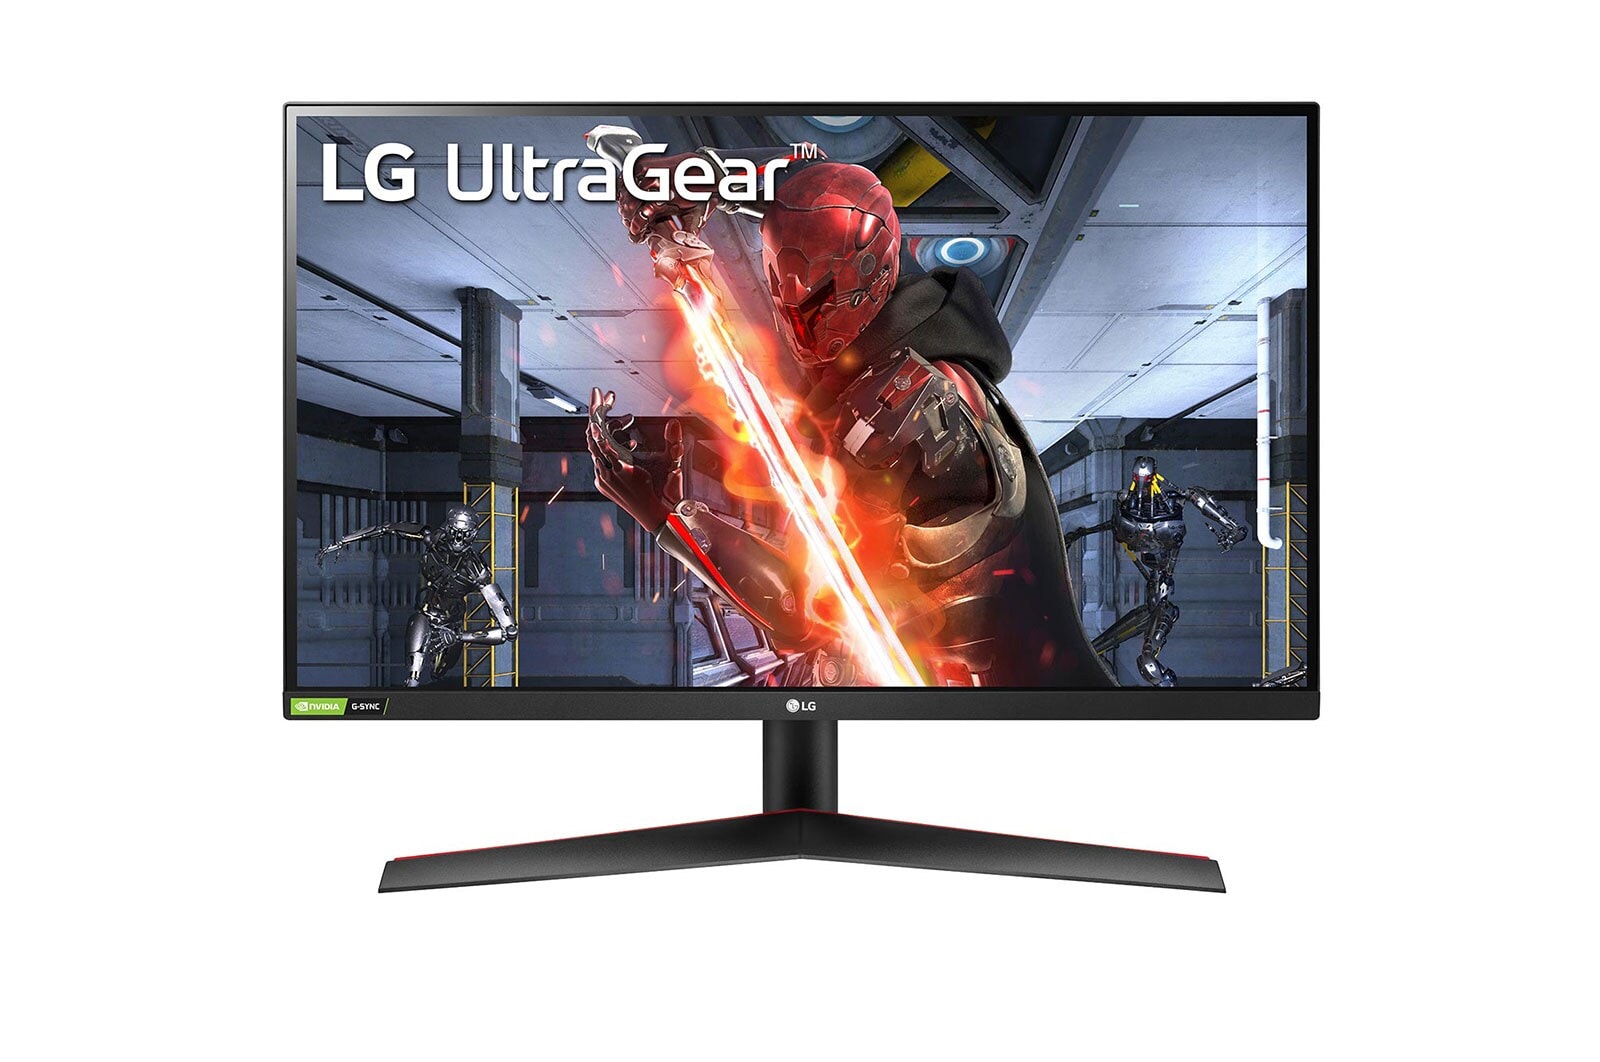 LG 27” UltraGear™ Full HD IPS 1ms (GtG) Gaming Monitor with NVIDIA® G-SYNC® Compatible, 27GN60R-B